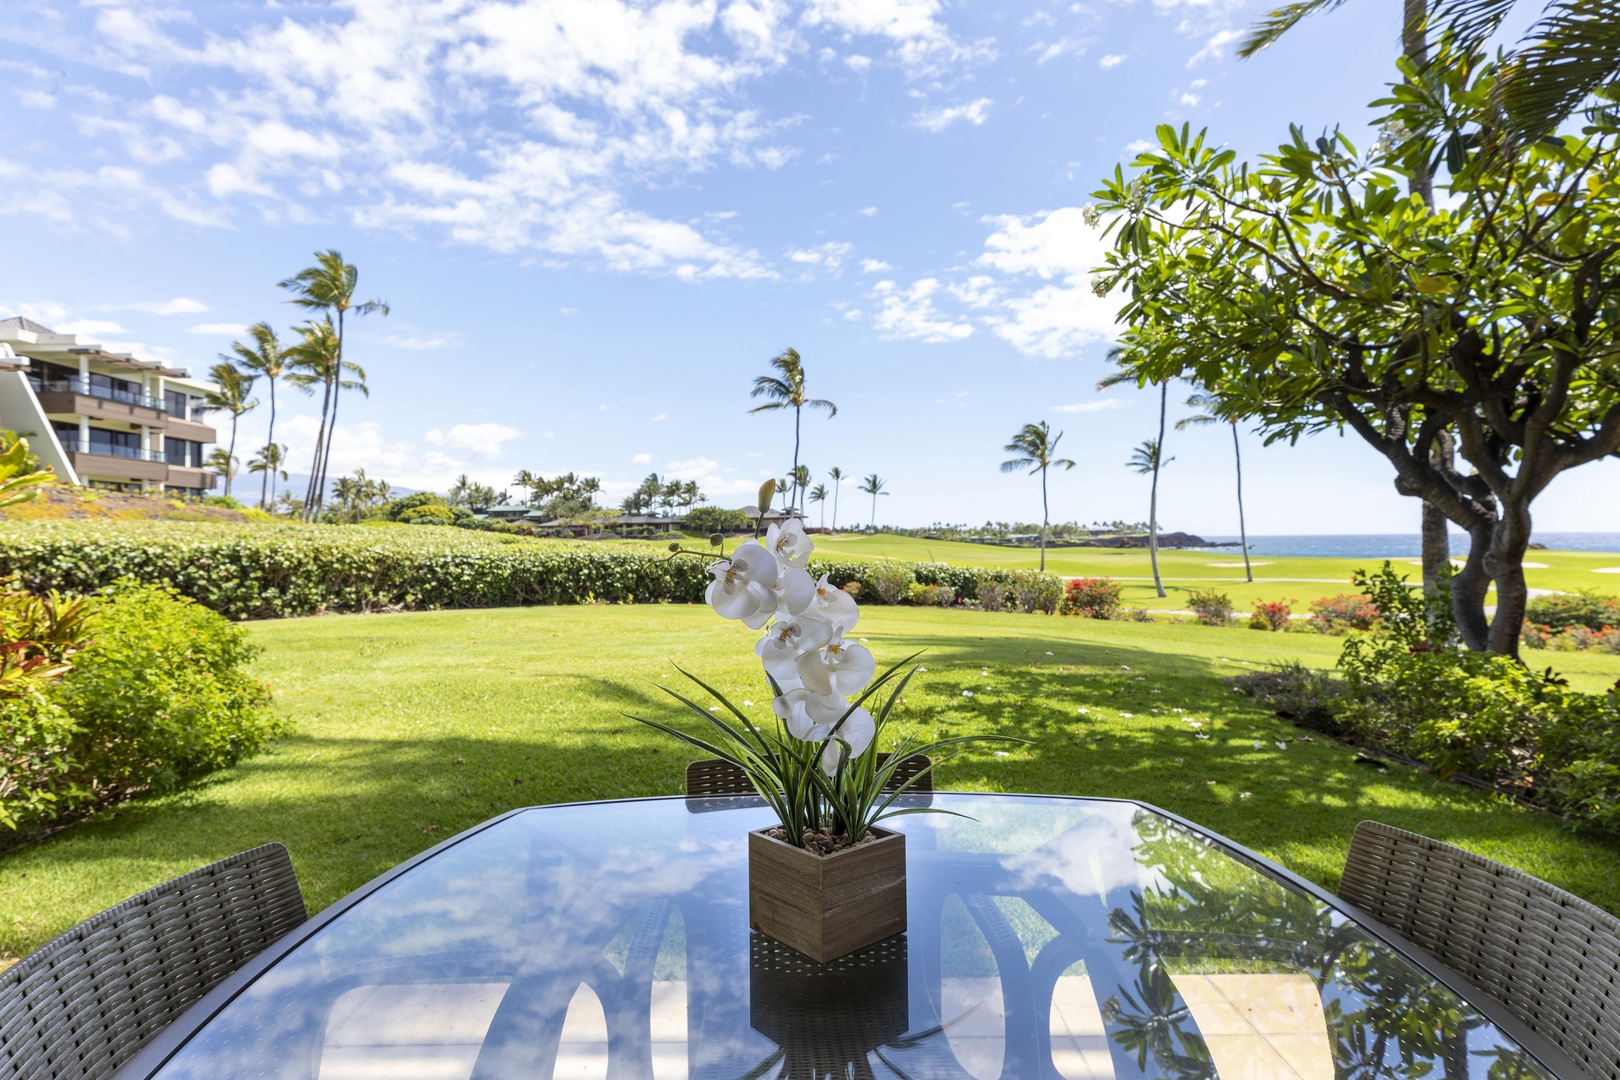 Kamuela Vacation Rentals, Mauna Lani Point E105 - Relax and your private lanai gazing out to the ocean views.